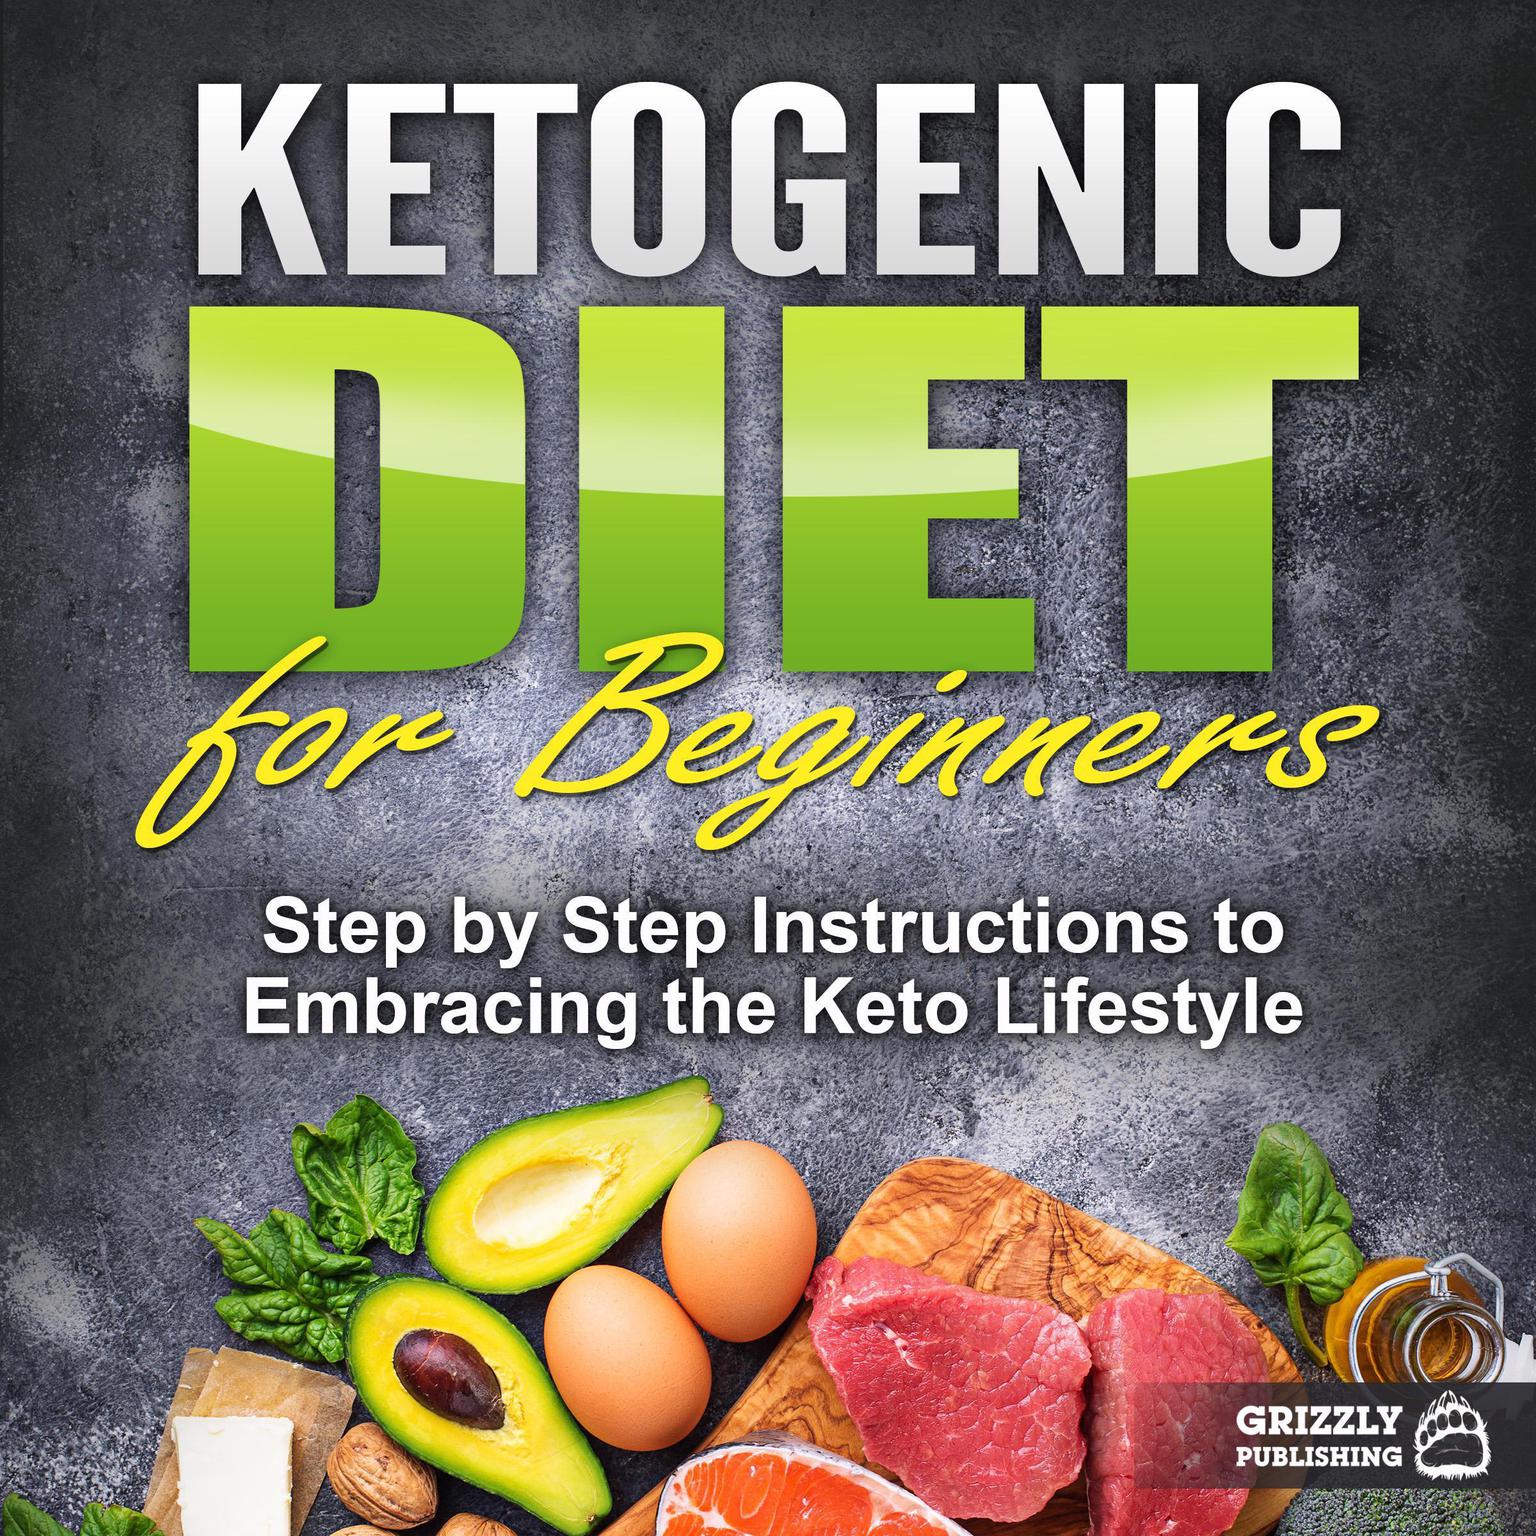 Ketogenic Diet for Beginners: Step by Step Instructions to Embracing the Keto Lifestyle Audiobook, by Grizzly Publishing